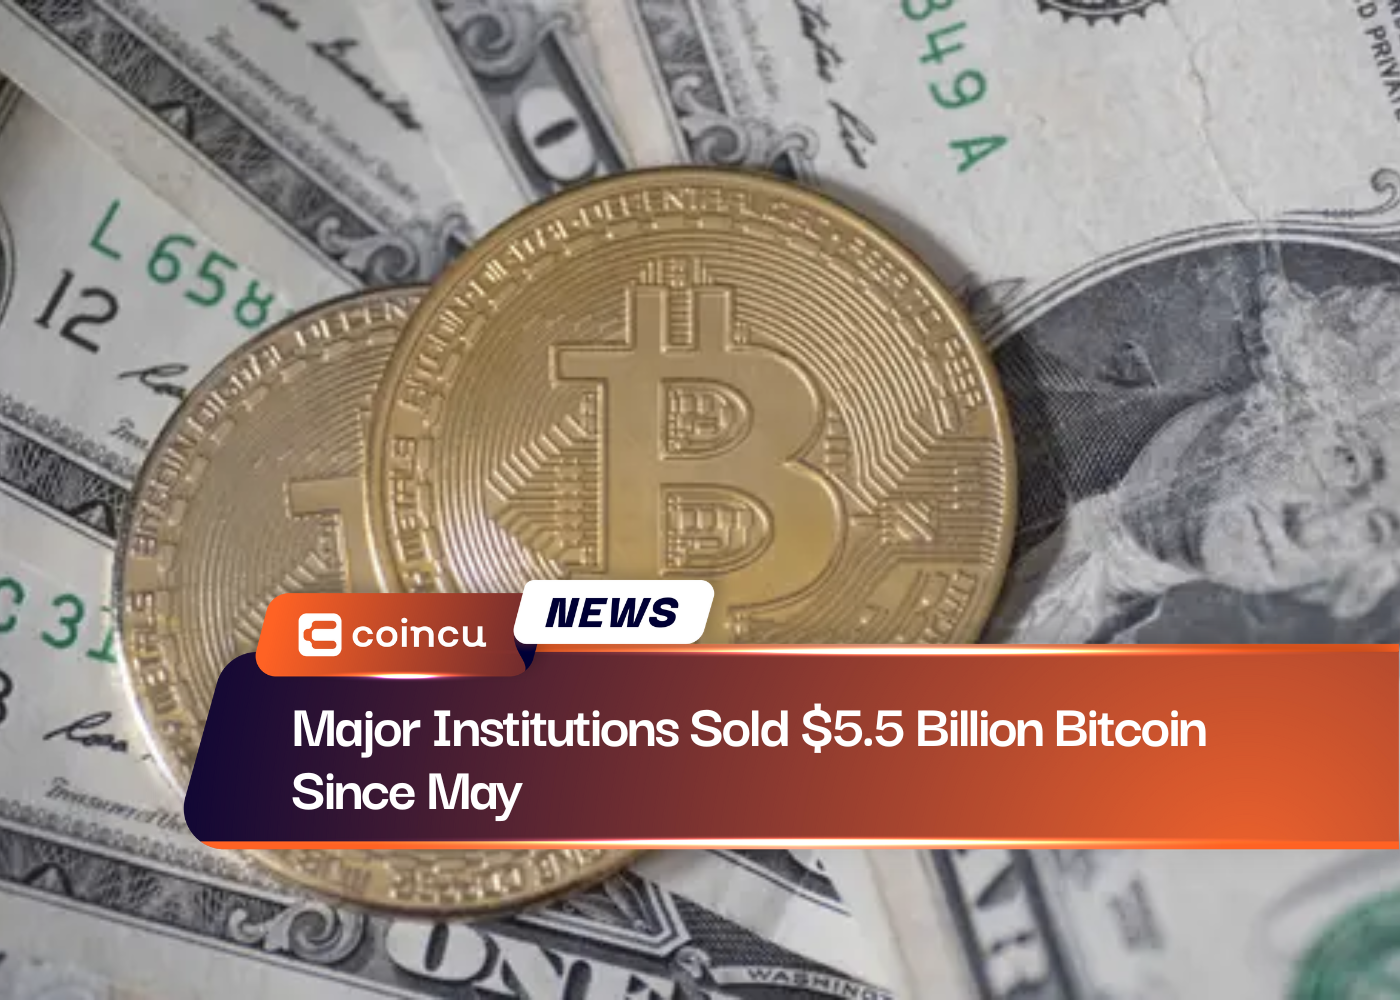 Major Institutions Sold $5.5 Billion Bitcoin Since May